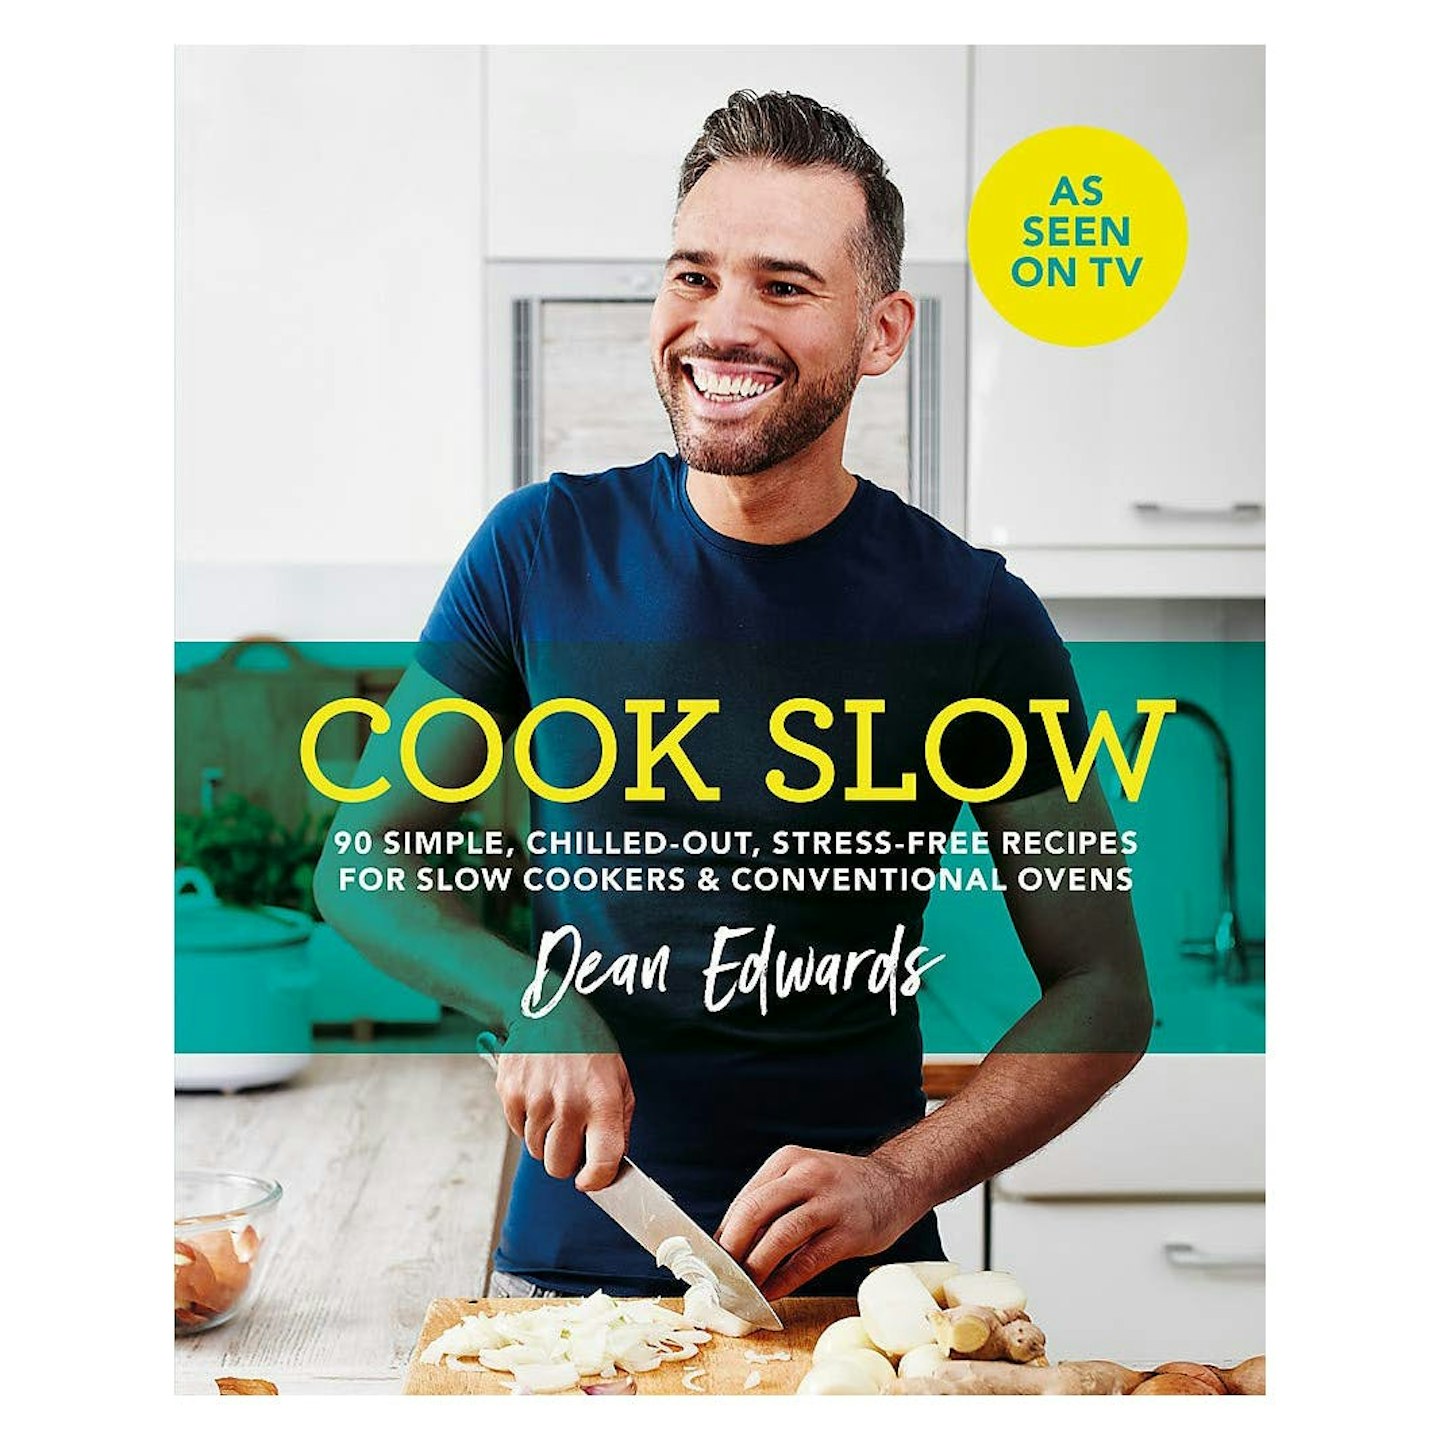 Cook Slow: 90 simple, chilled out, stress-free recipes for slow cookers & conventional ovens (Dean Edwards Slow Cooker)